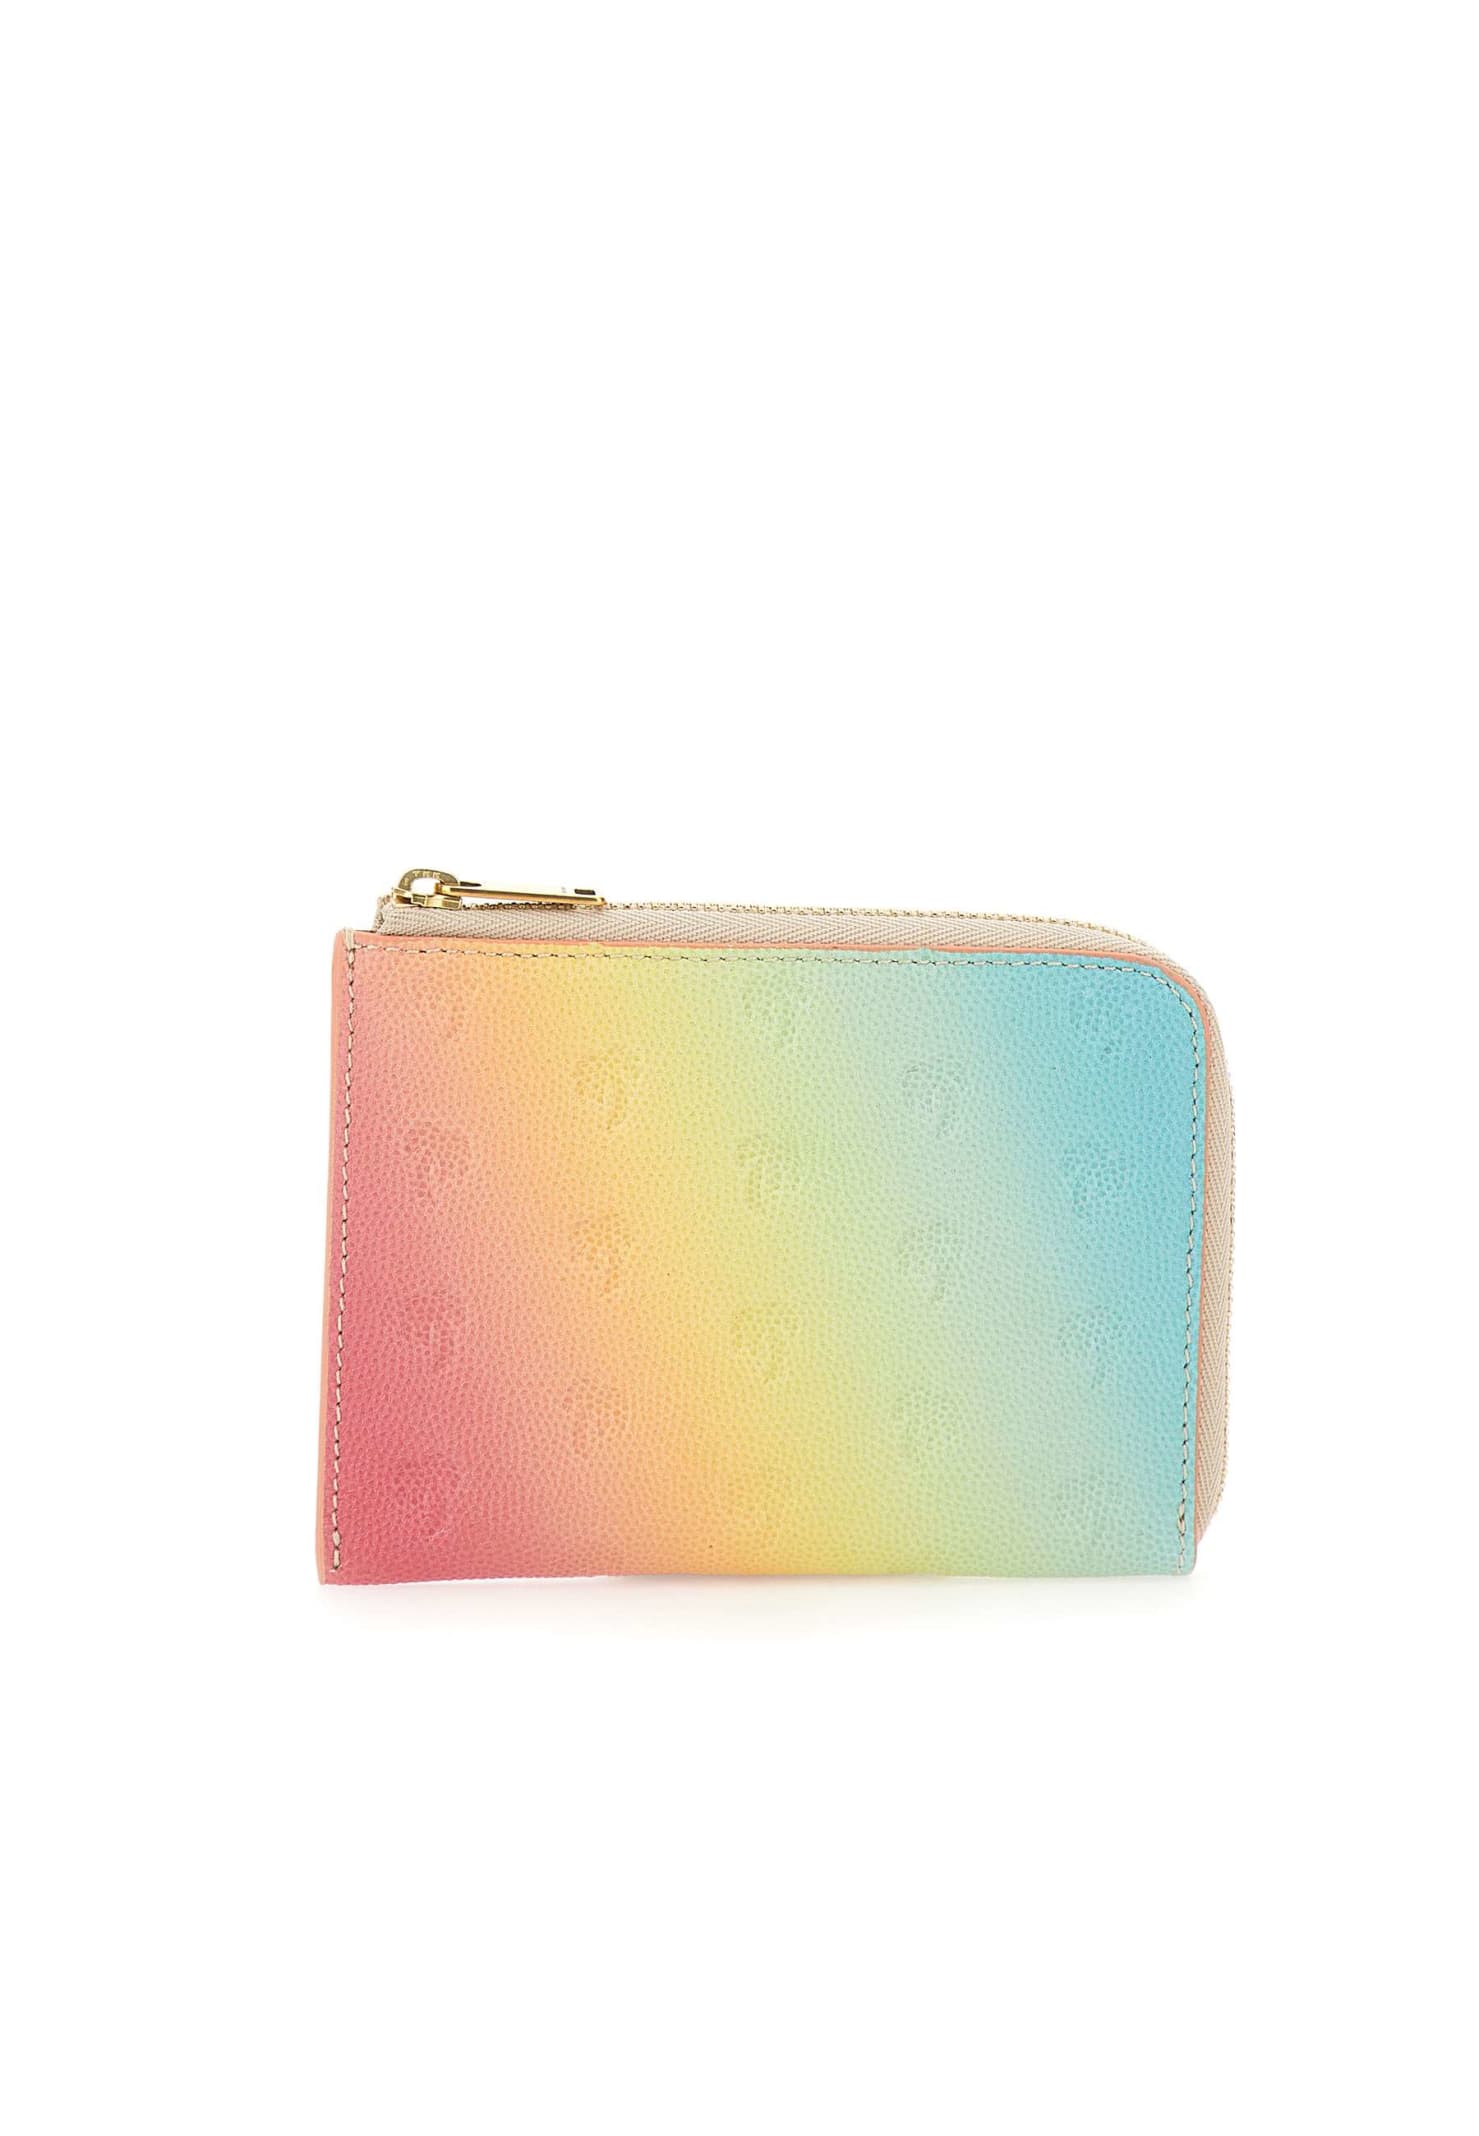 palm angels raimbow pouch leather wallet